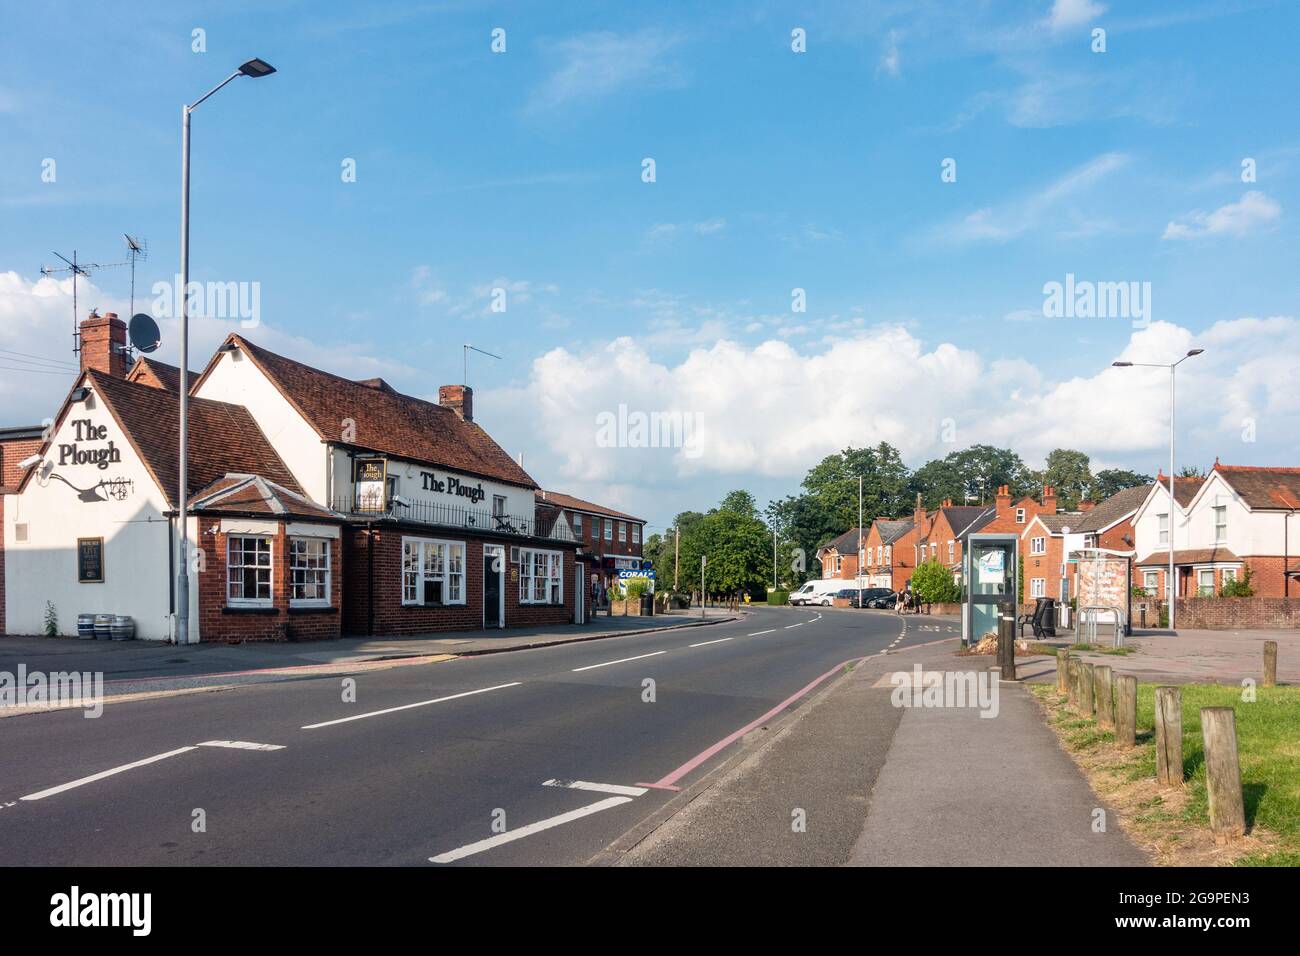 A view along School Road in Tilehurst, Reading, UK with The Plough pub on the side of the road. Stock Photo